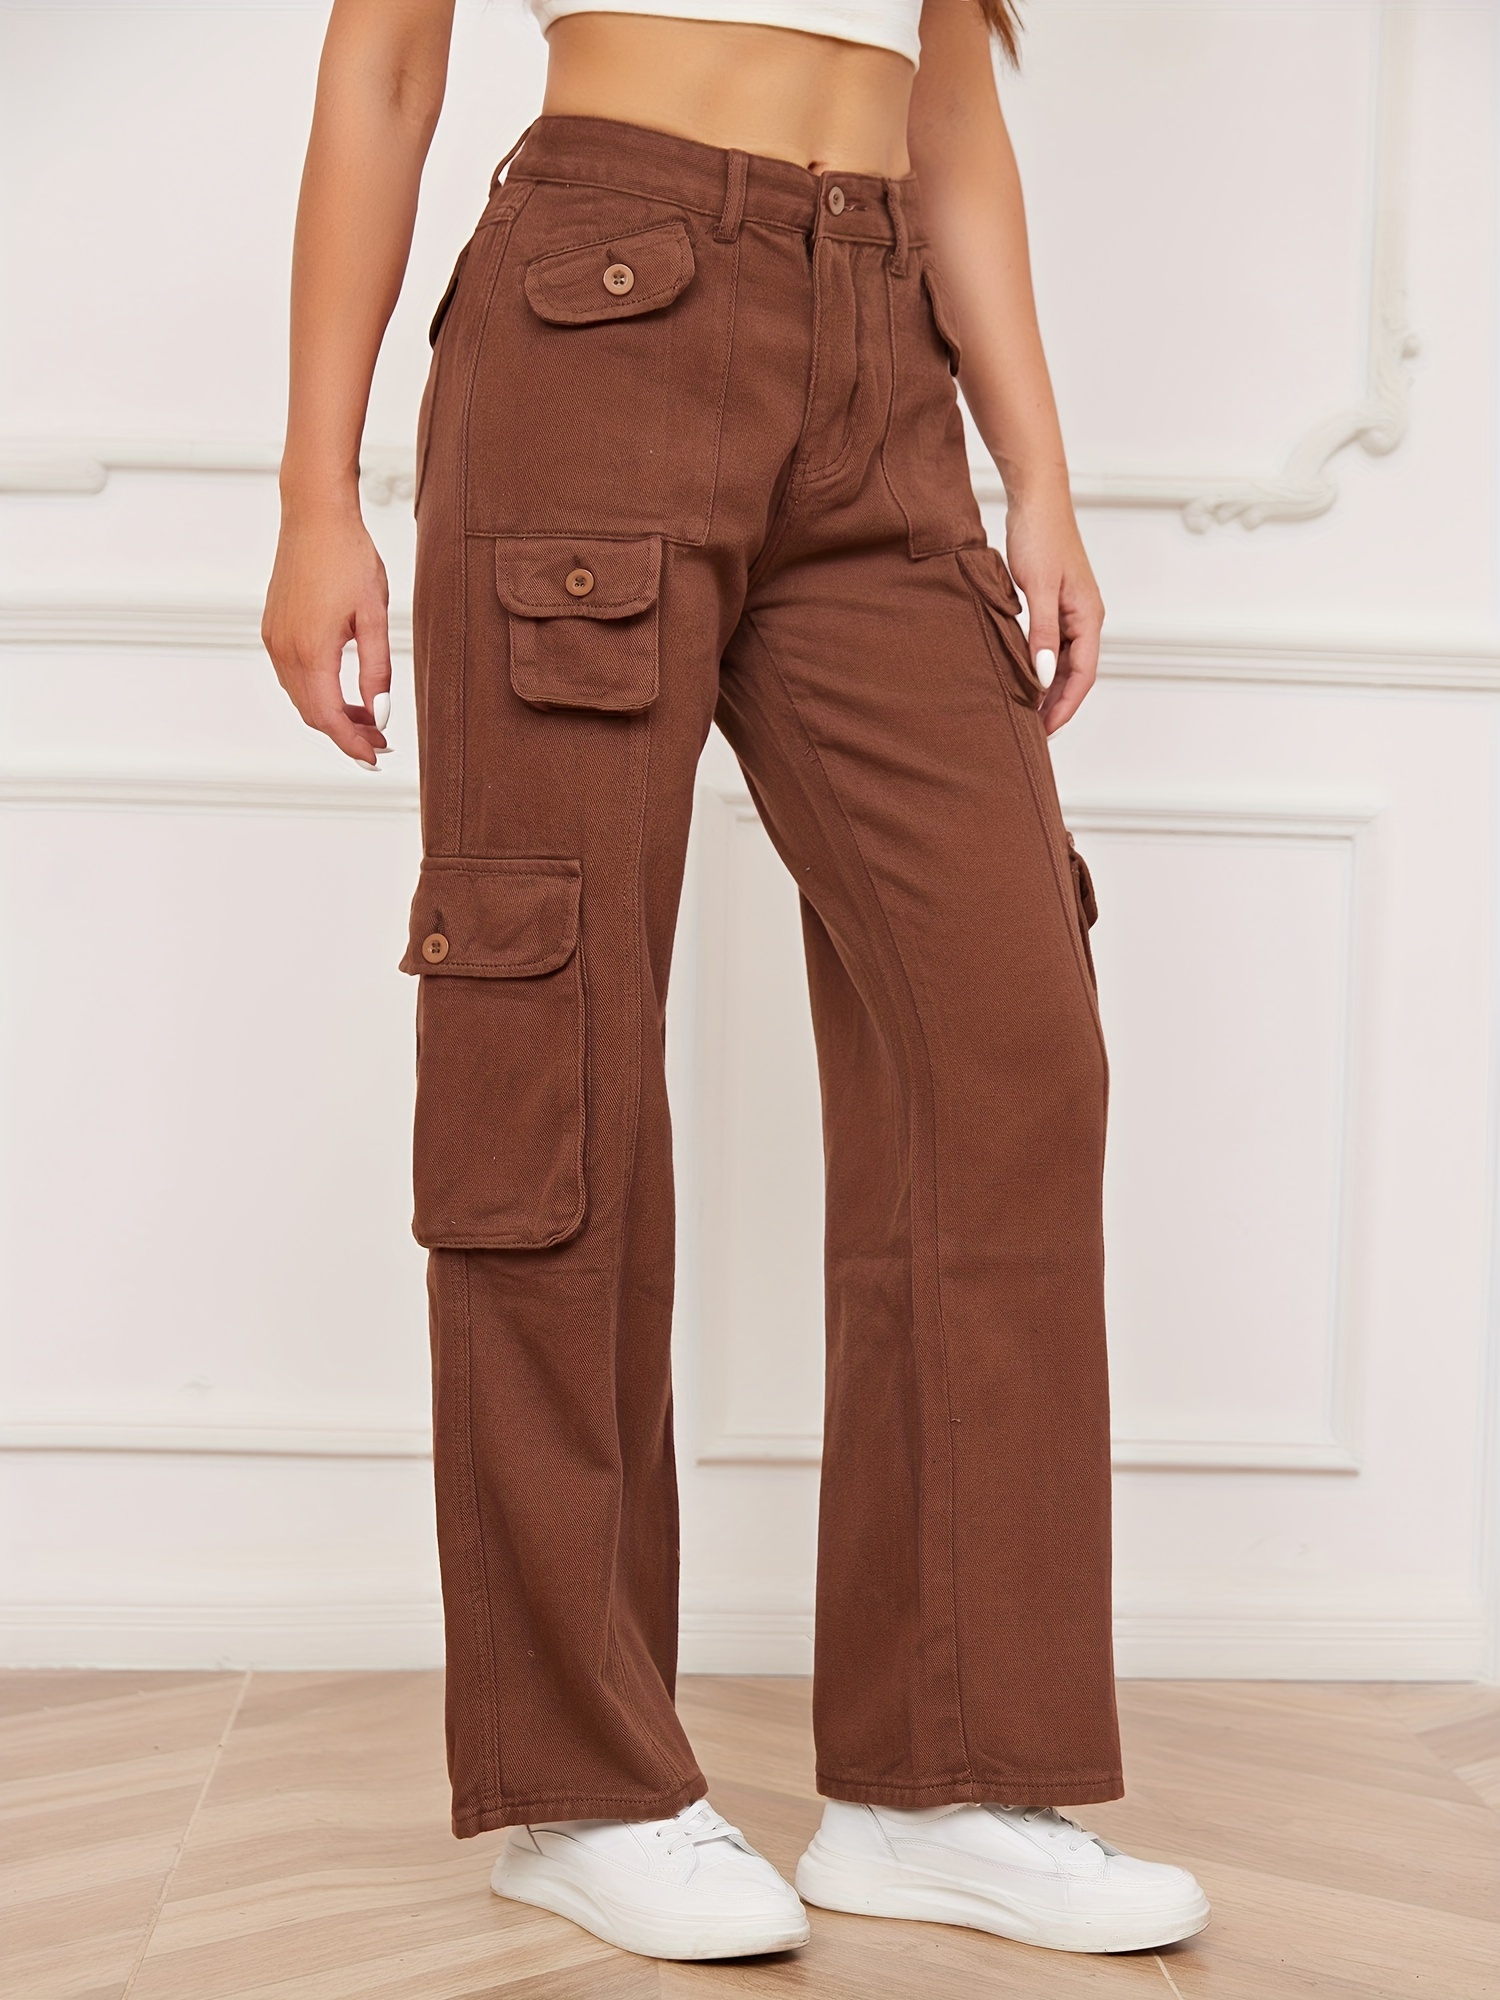 Almond Brown Women's Straight Leg Cargo Pants Casual Y2K High Waisted –  Lookbook Store